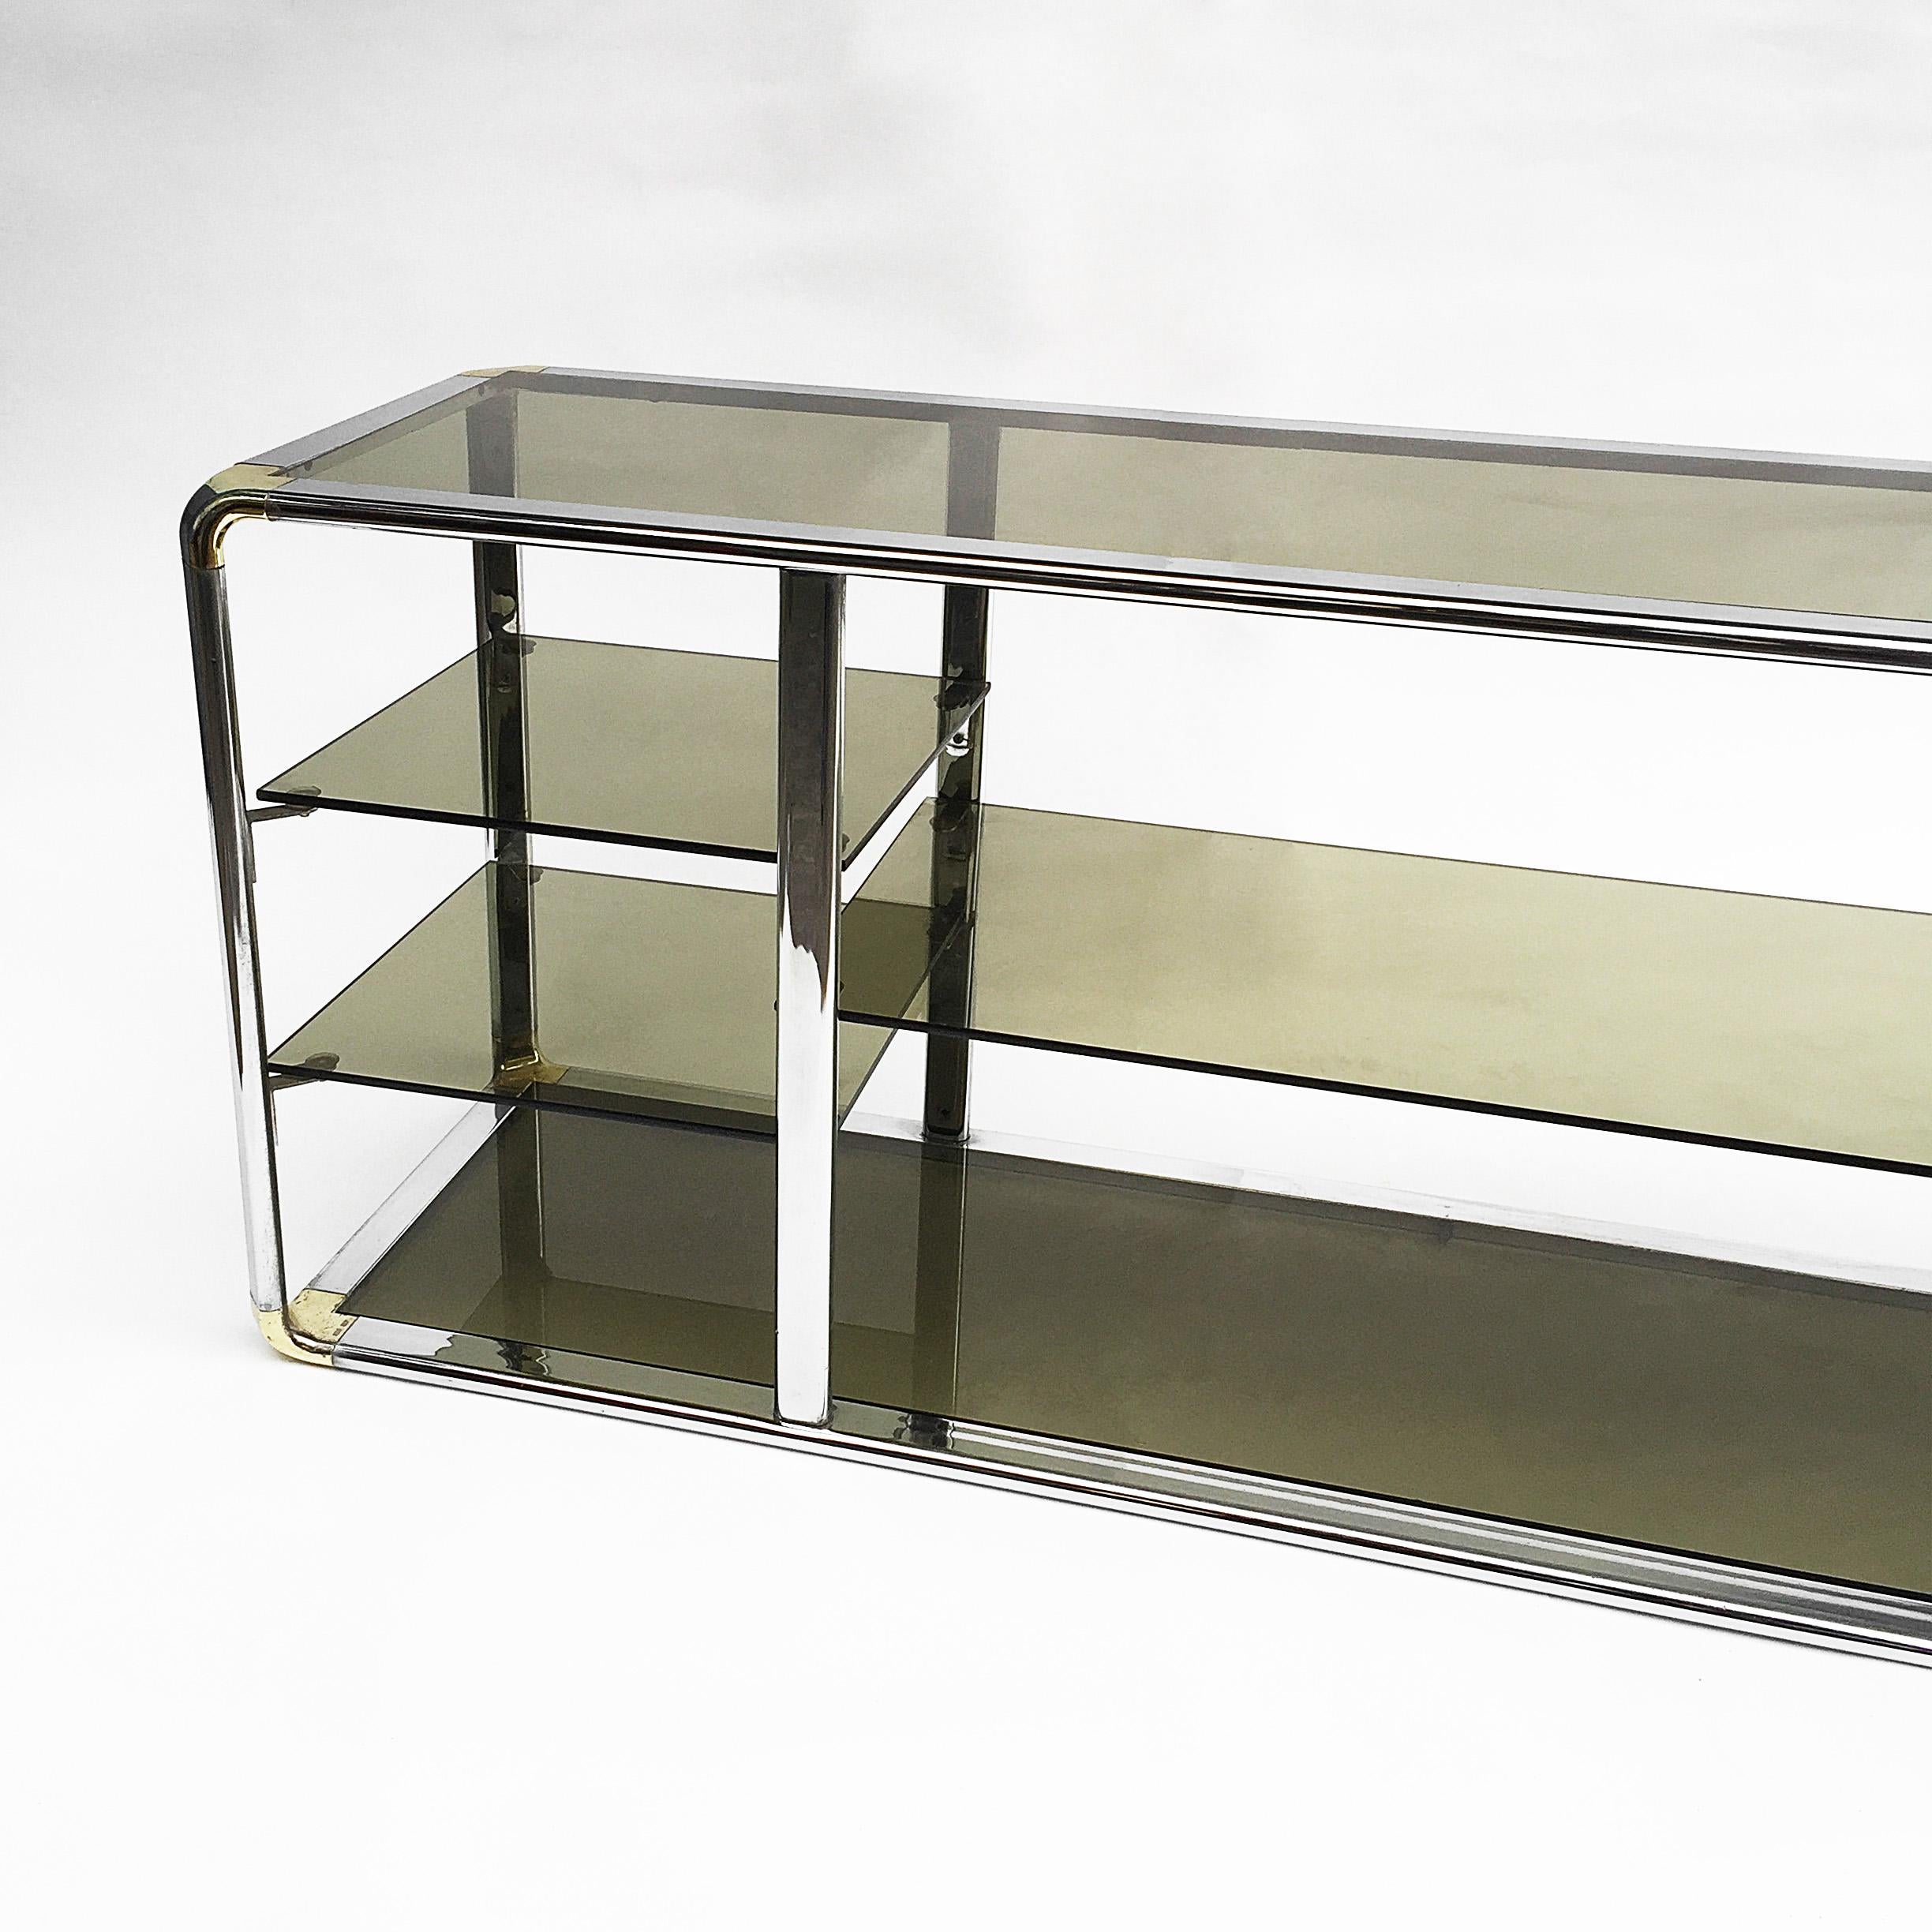 Italian Chrome And Glass Sound System Display Shelving Etagere Unit Vintage Midcentury